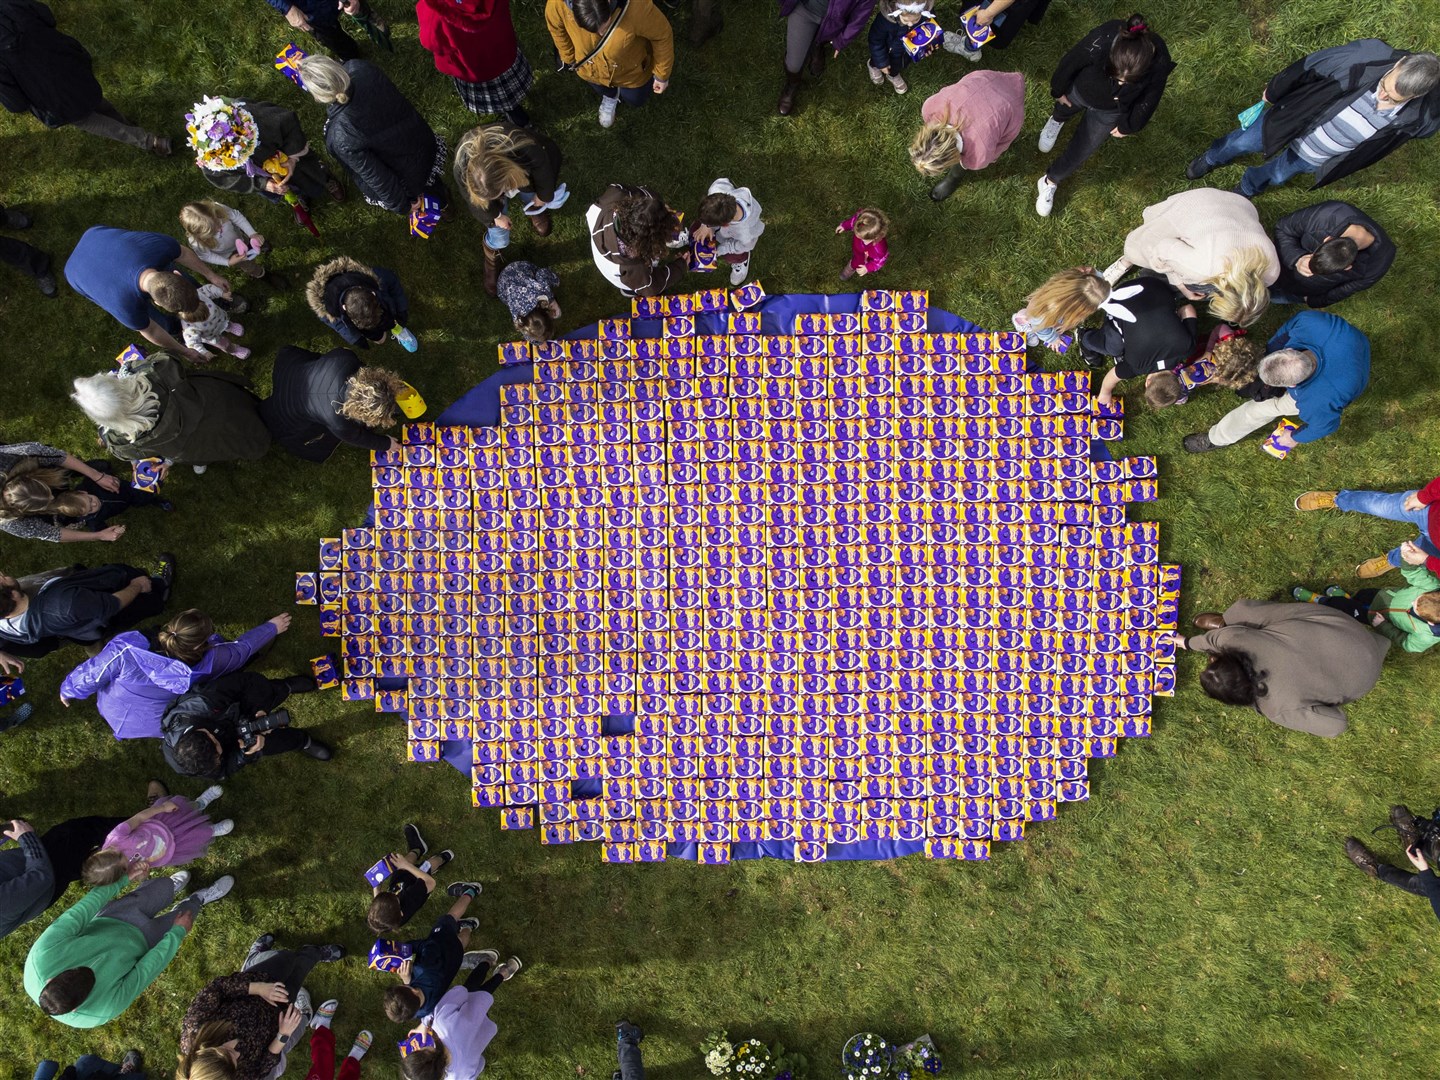 The entire parish was surprised with hundreds of individual Easter eggs (Fabio De Paola/PA Wire)